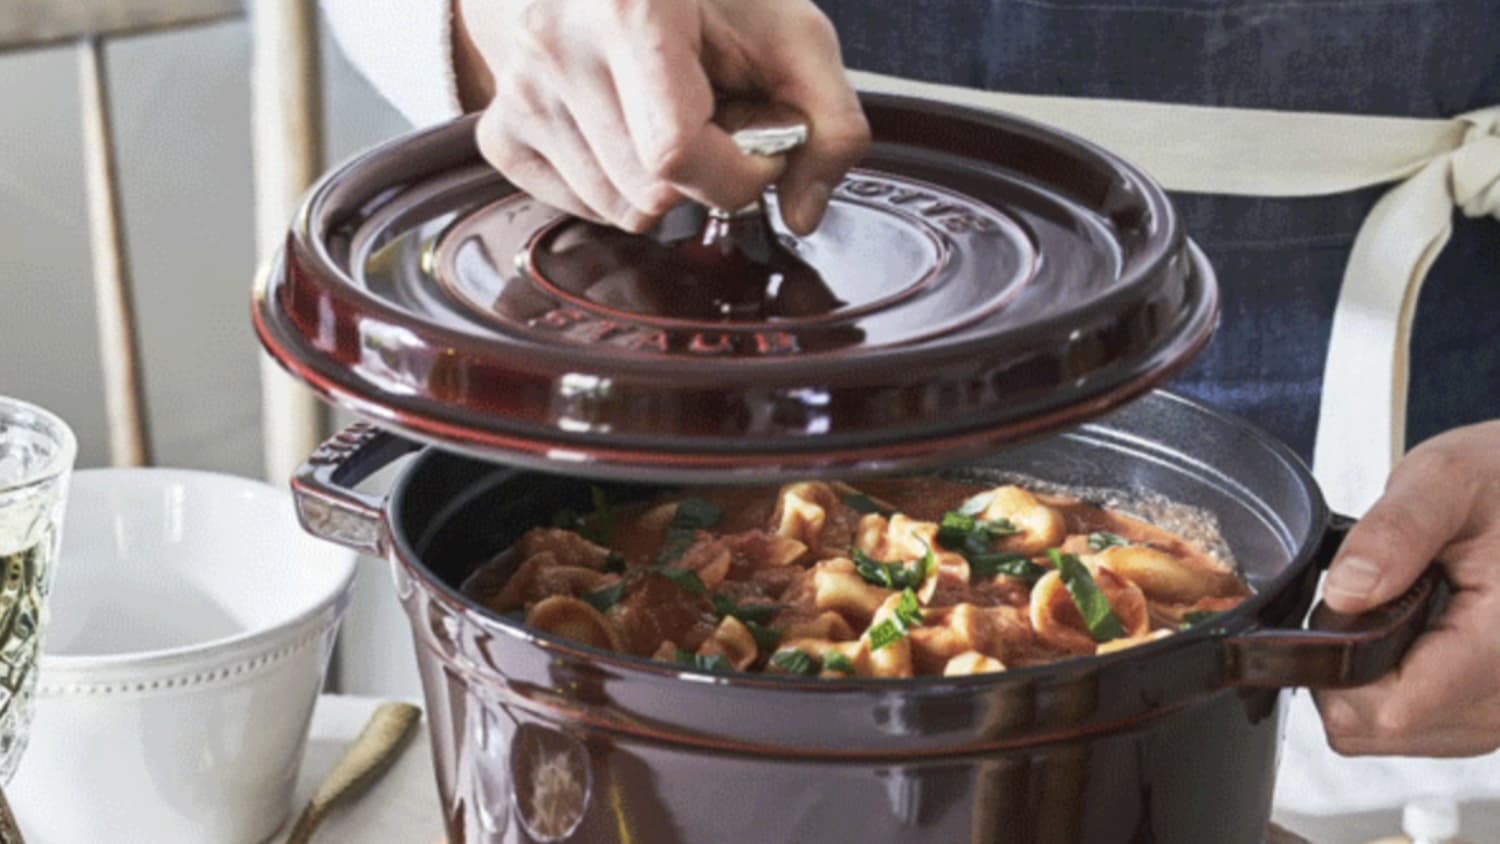 Shop Staub's Iconic 5-Quart Cocotte at Zwilling's End-Of-Year Sale